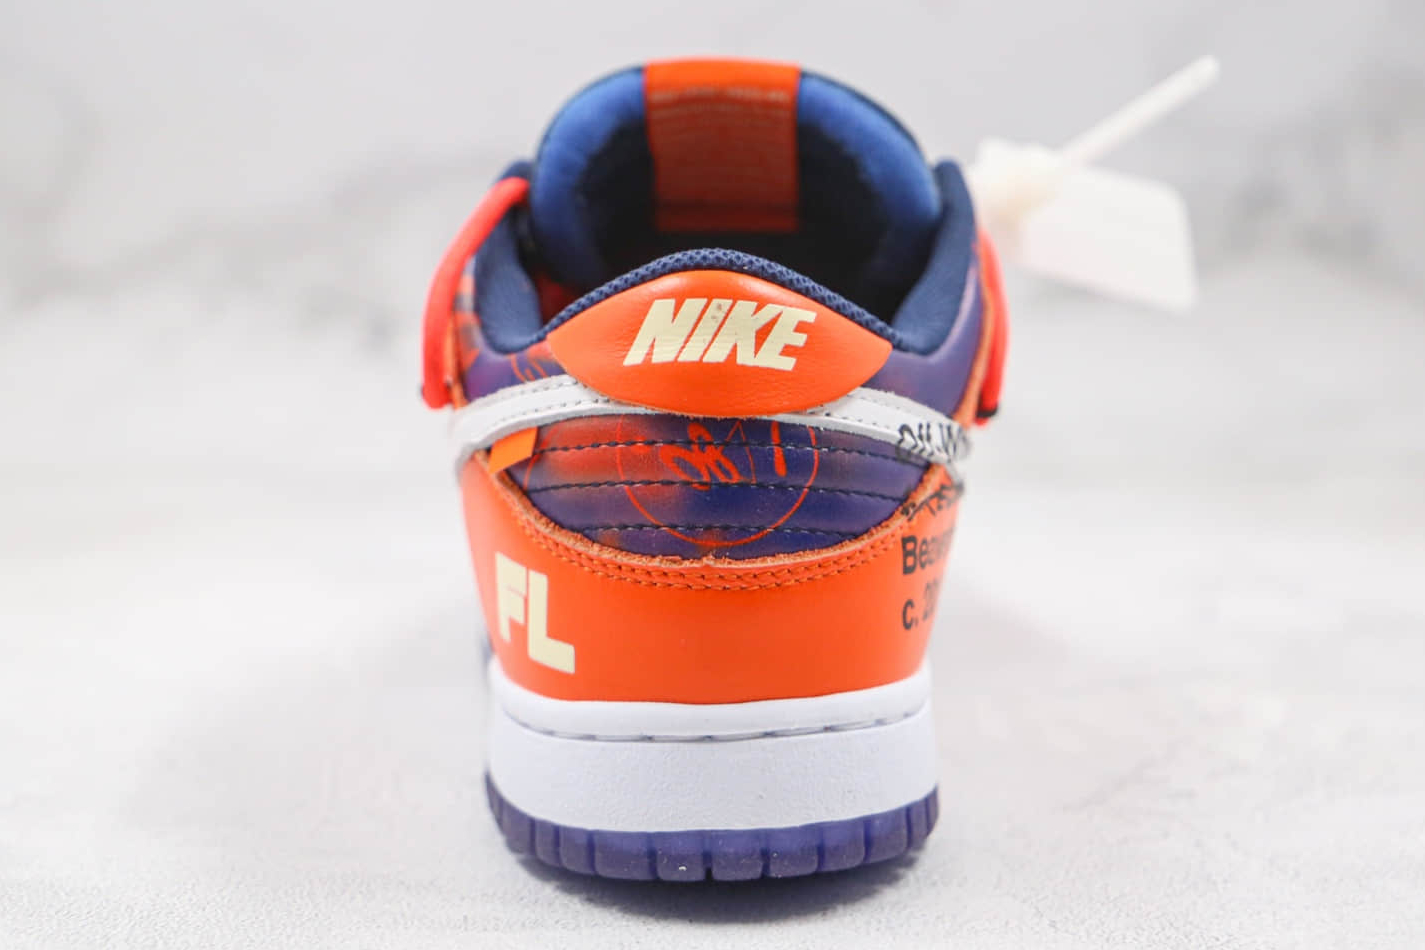 OFF-WHITE x Nike SB Dunk Low Orange Perple White Shoes CT0856-801 - Premium Collaboration Dunk with Eye-Catching Colors!